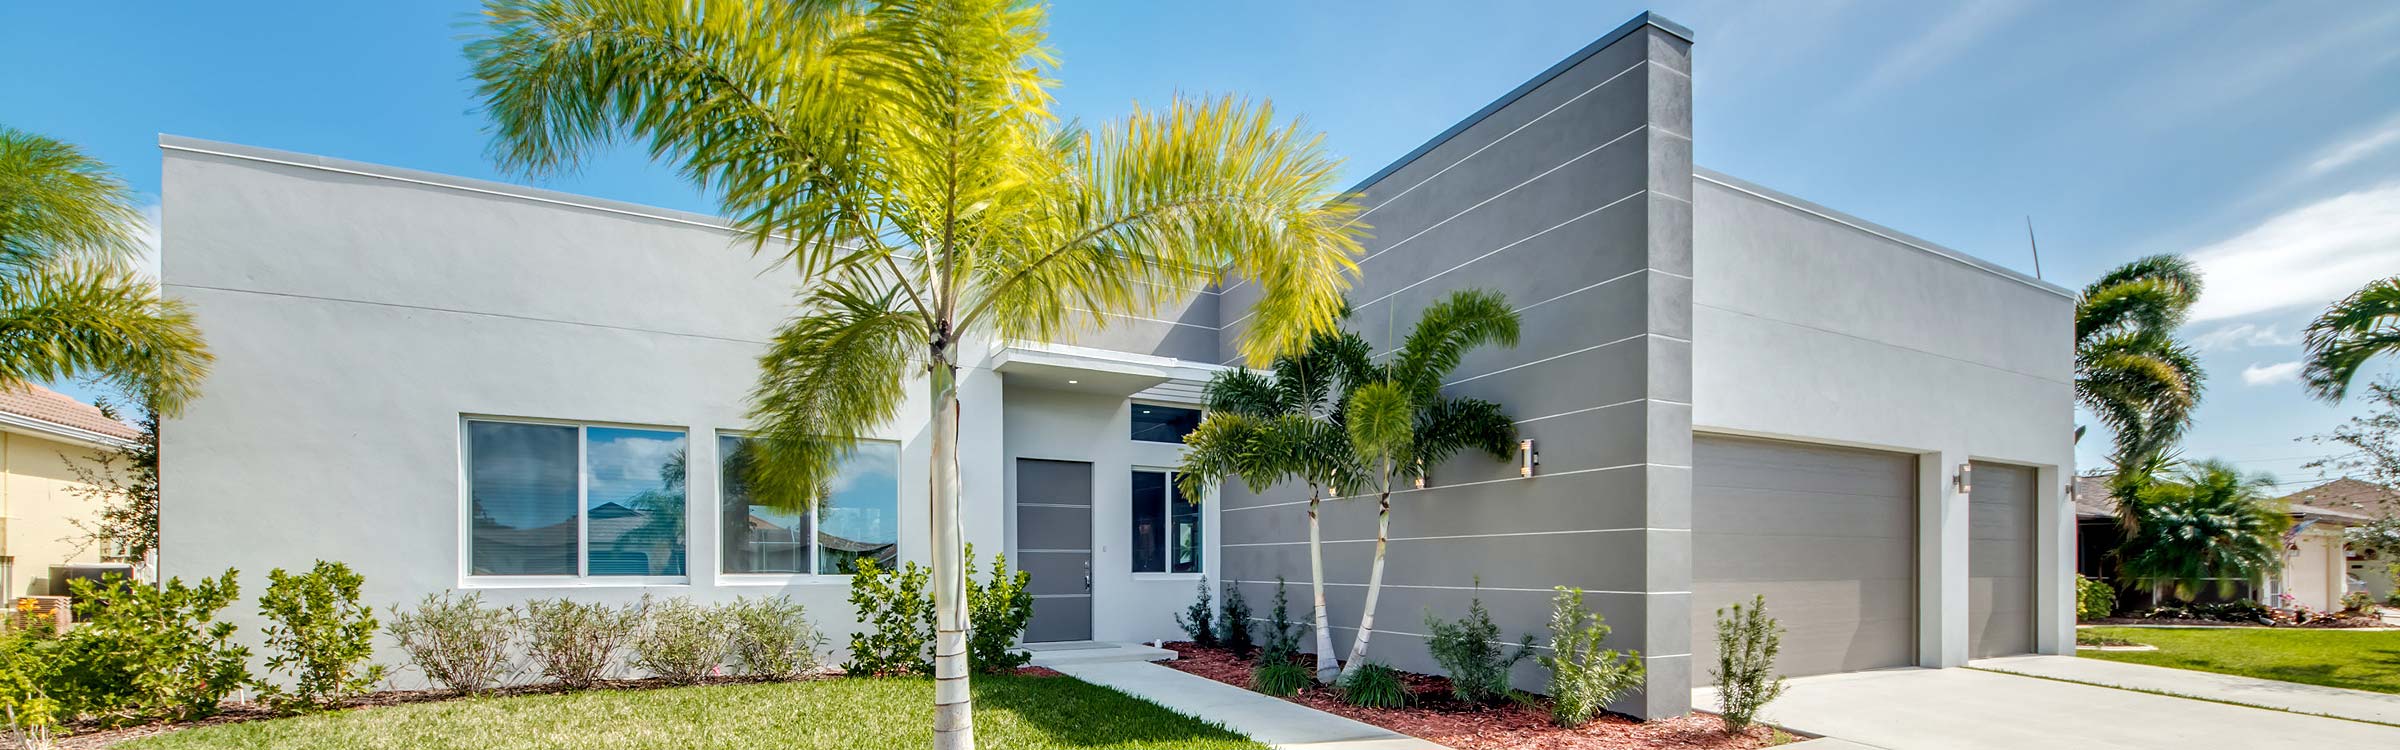 Home Models in Cape Coral | Florida